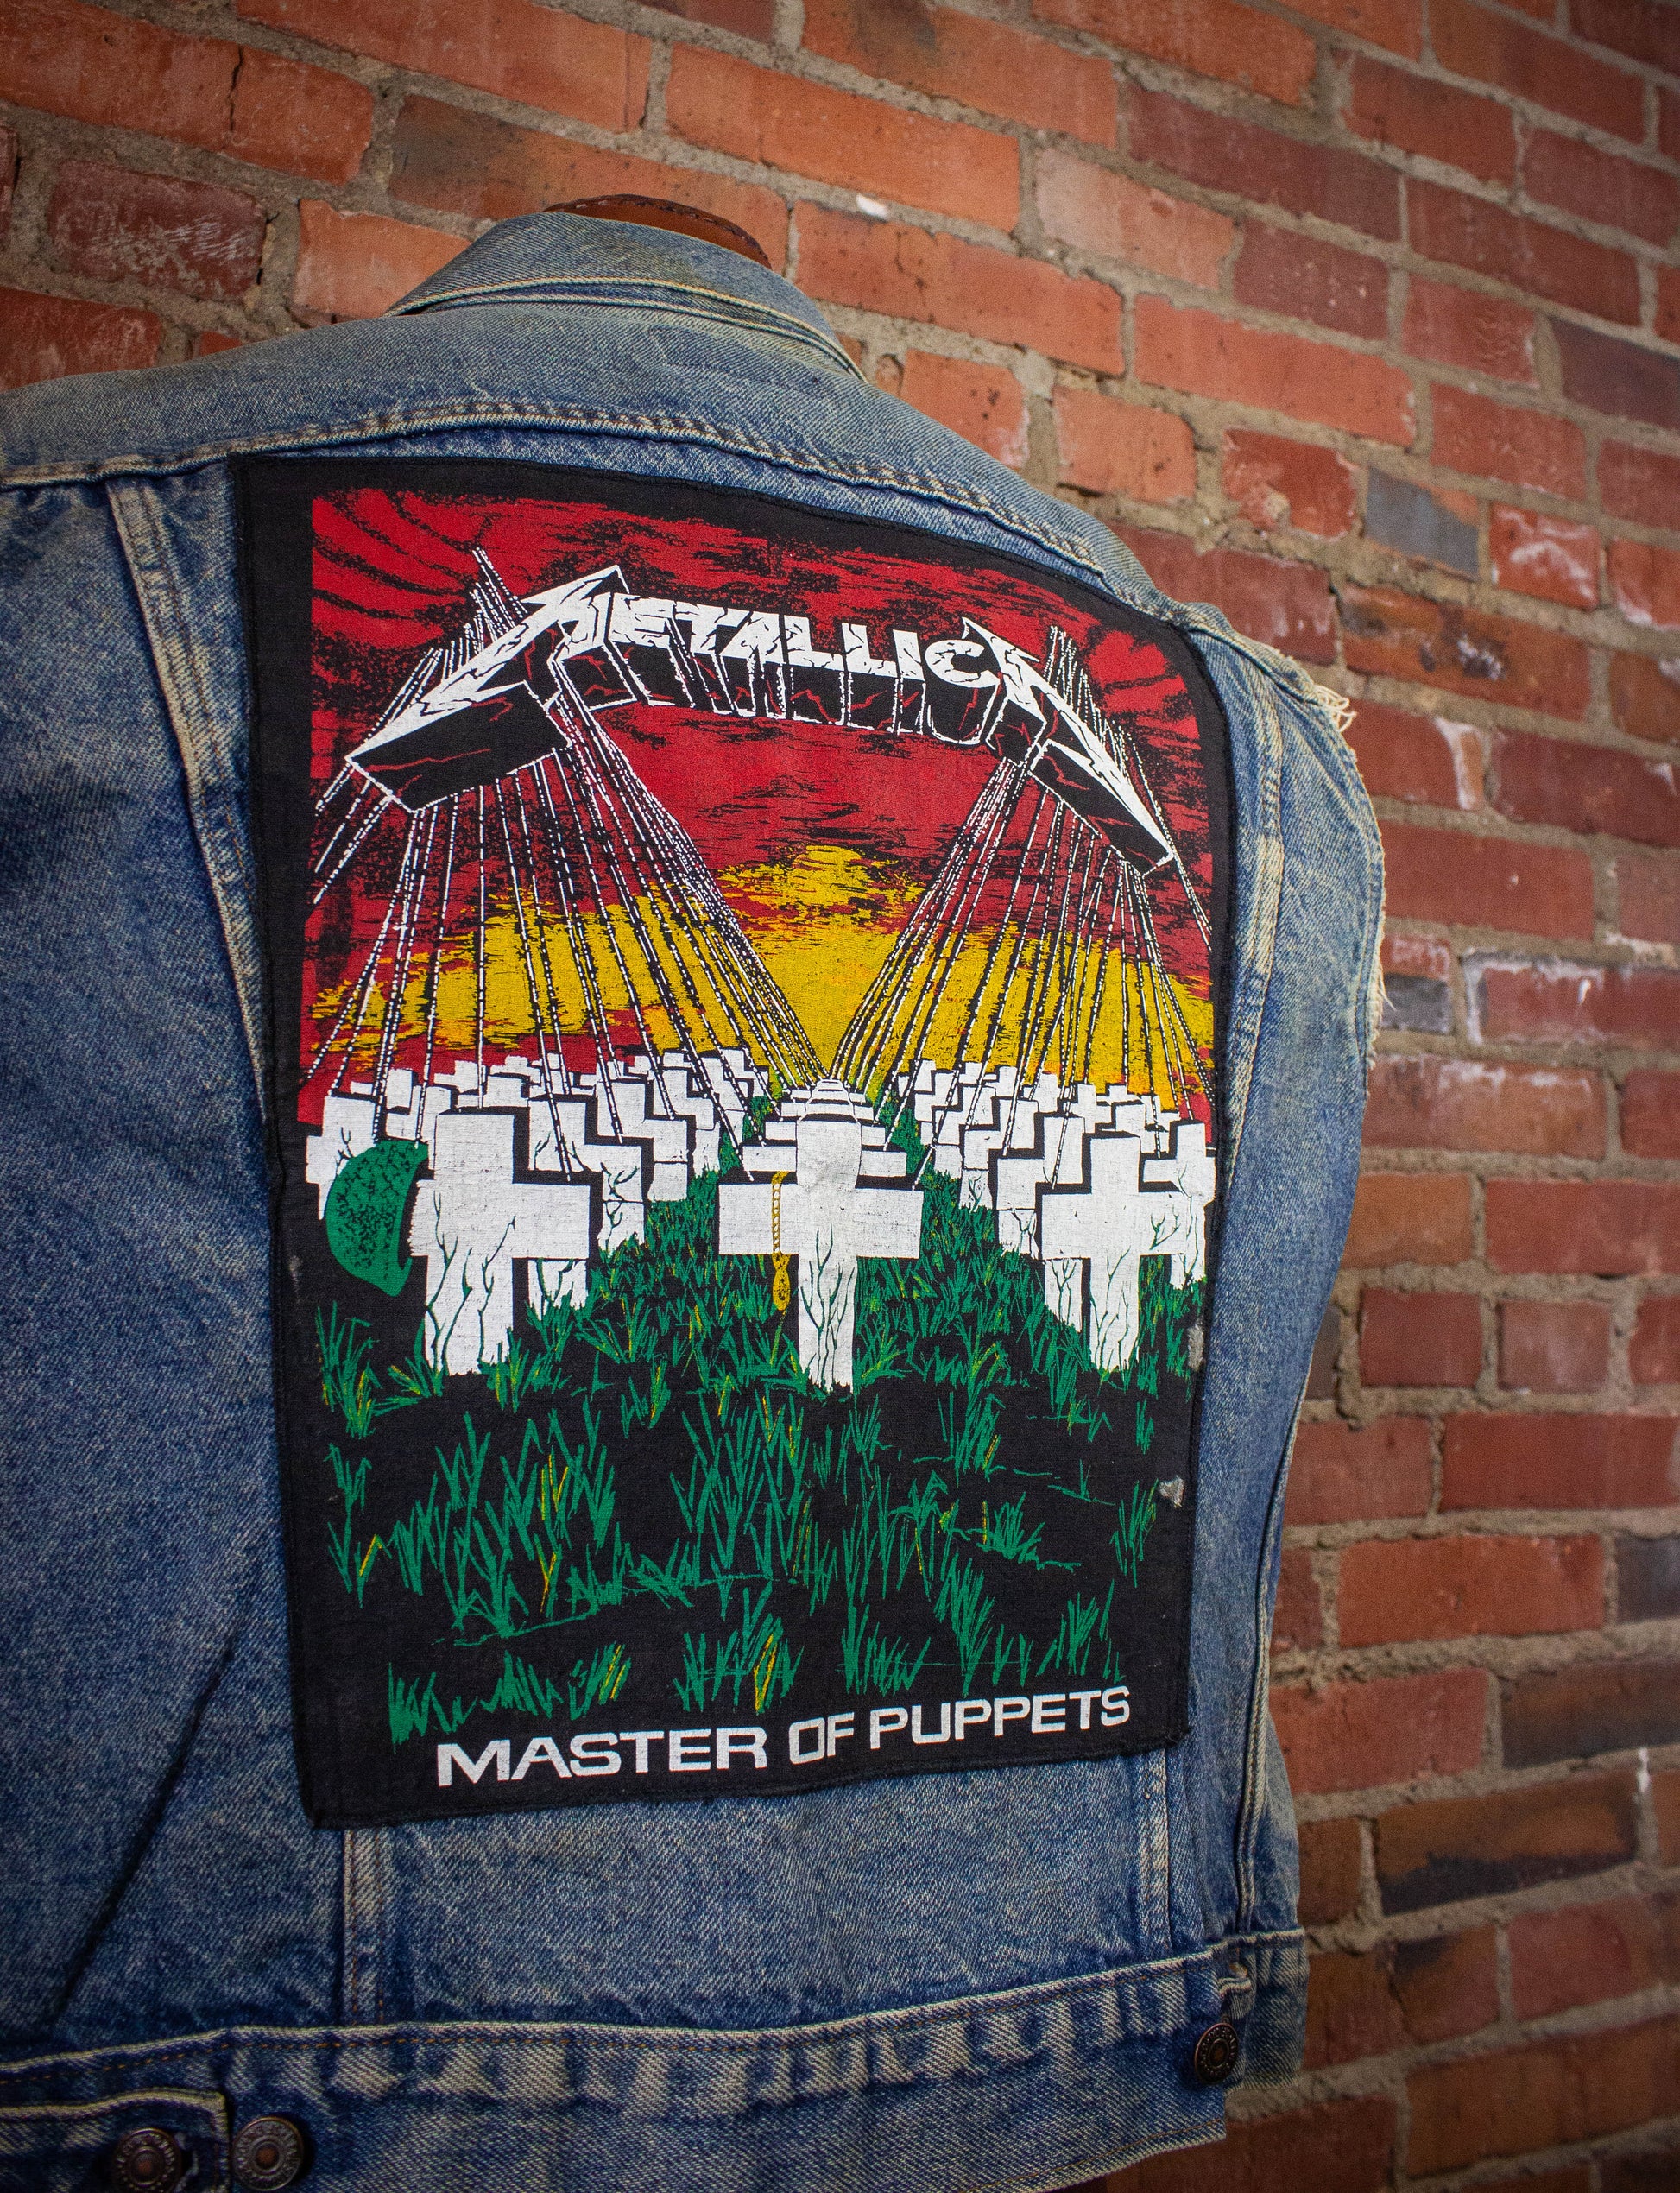 Metallica - Master of Puppets Back Patch